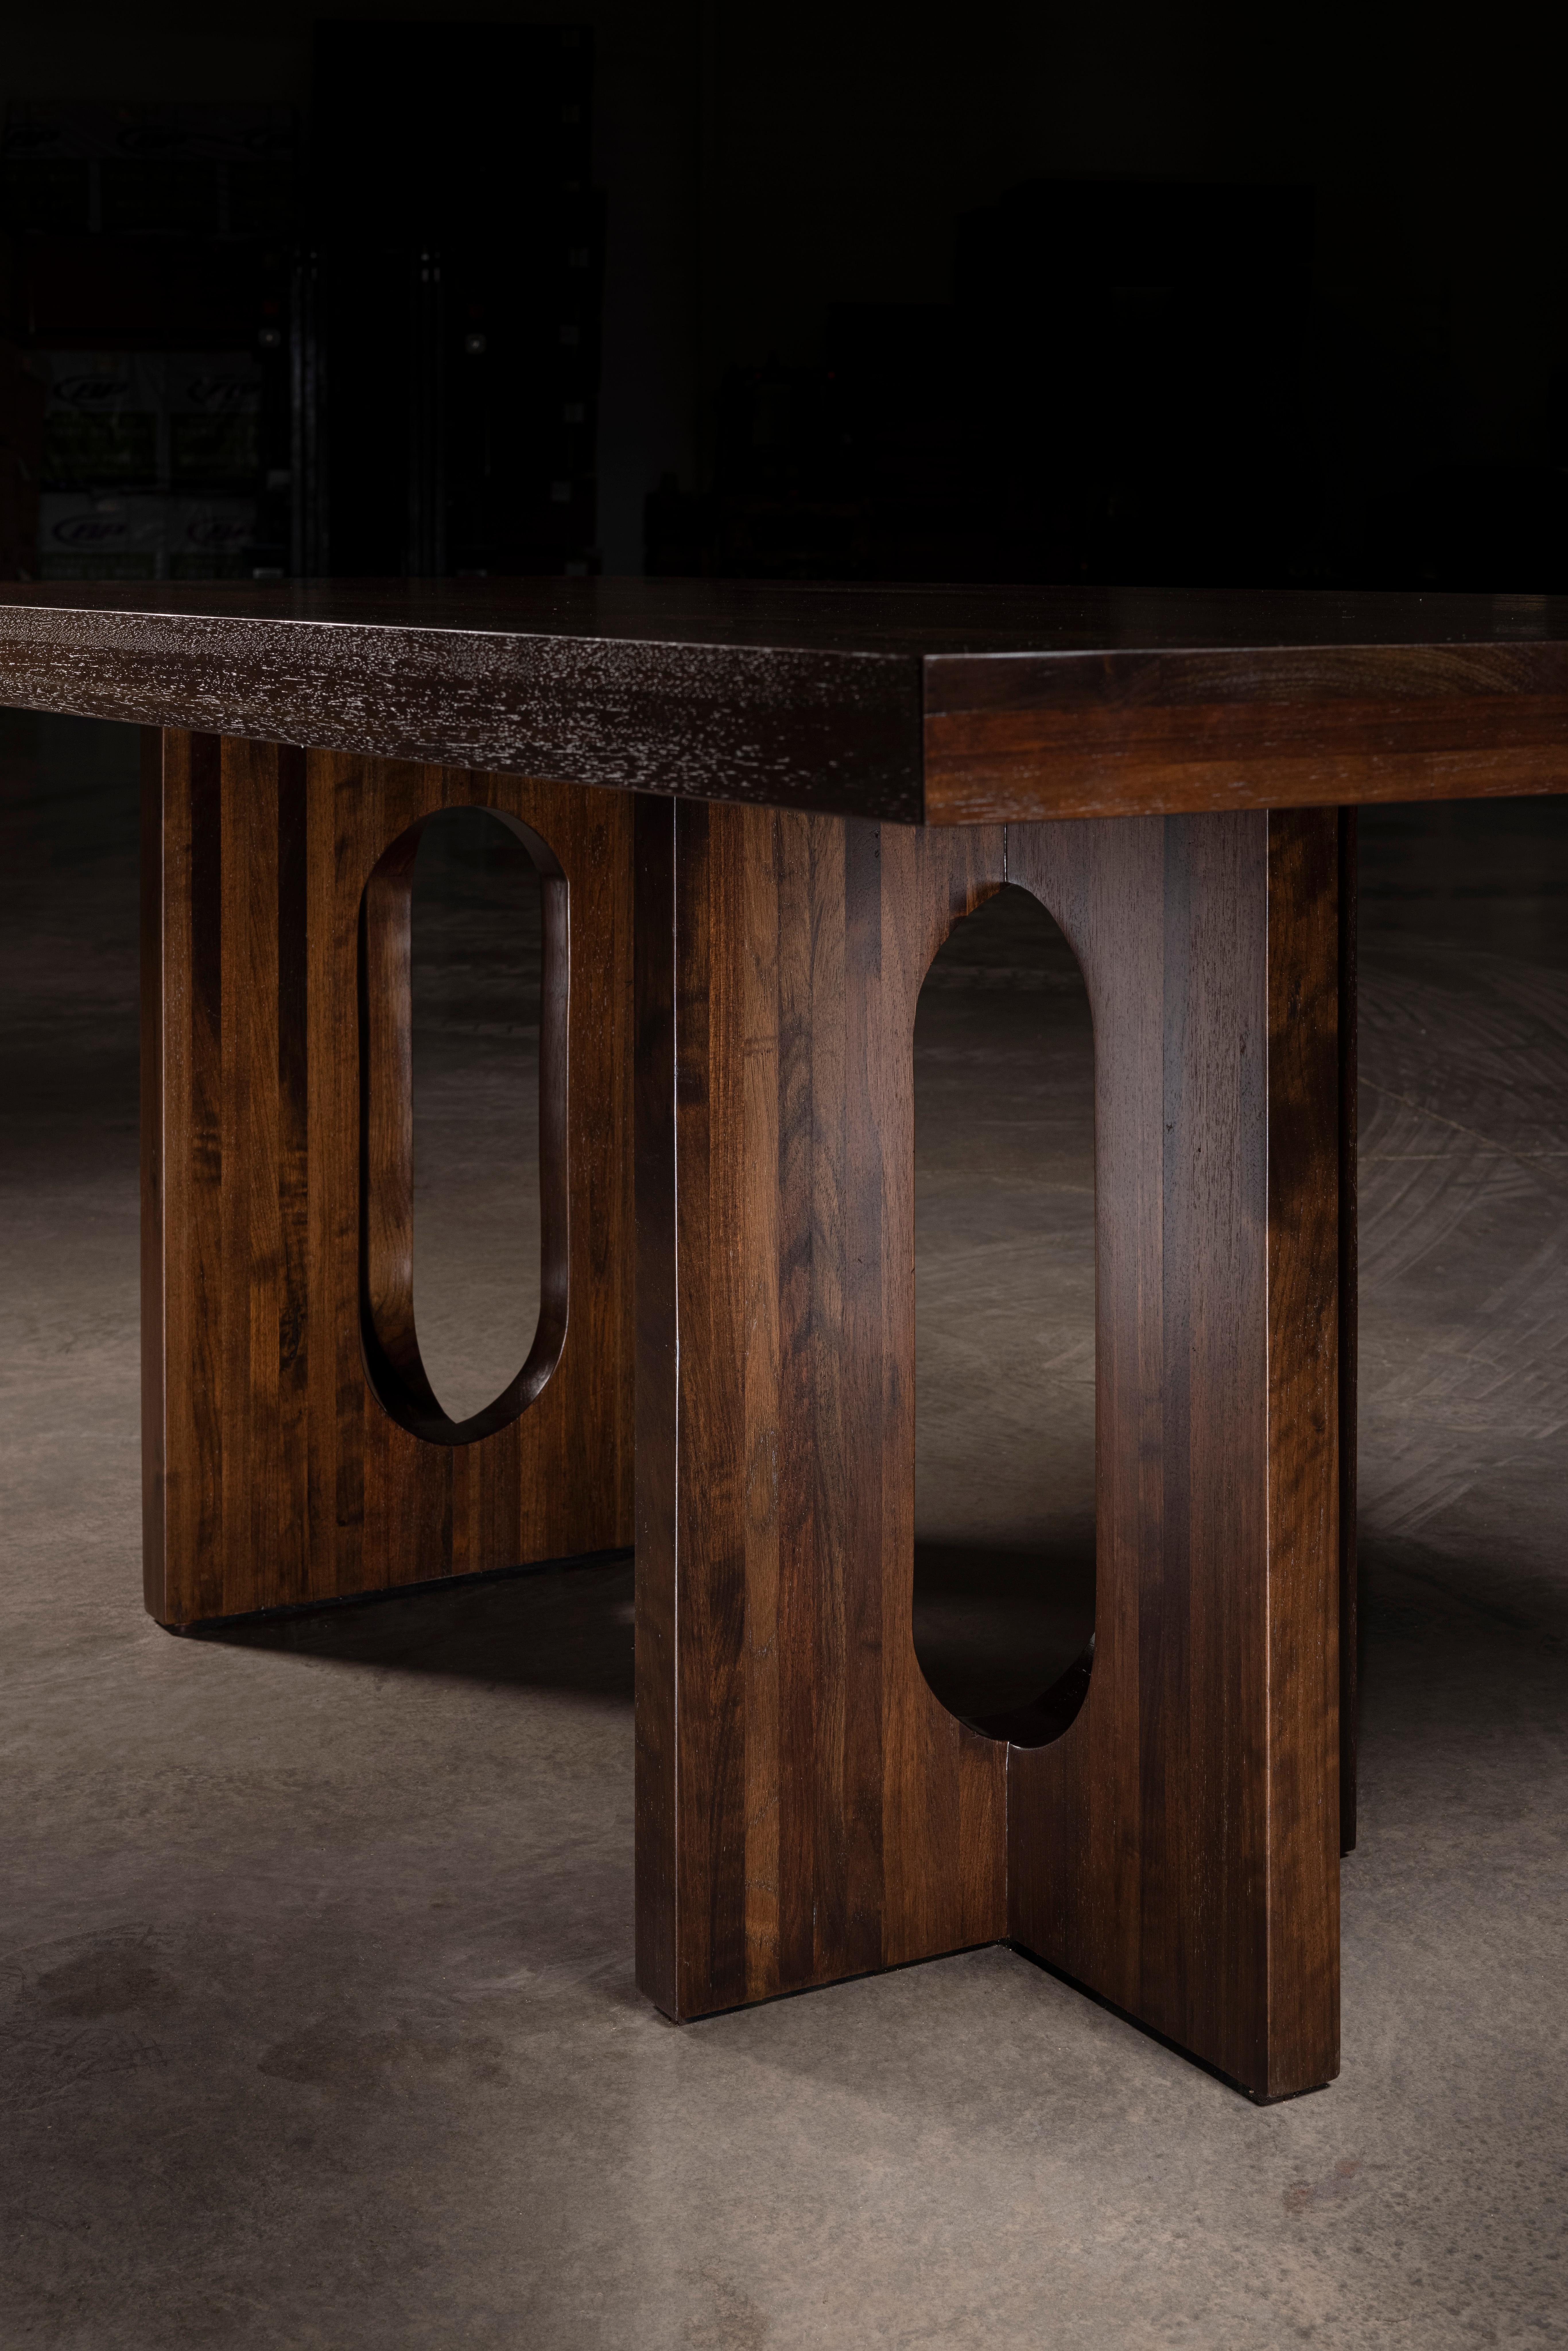 Solid Peruvian Walnut Dining Table with 2 Geometric Modern Pedestals.